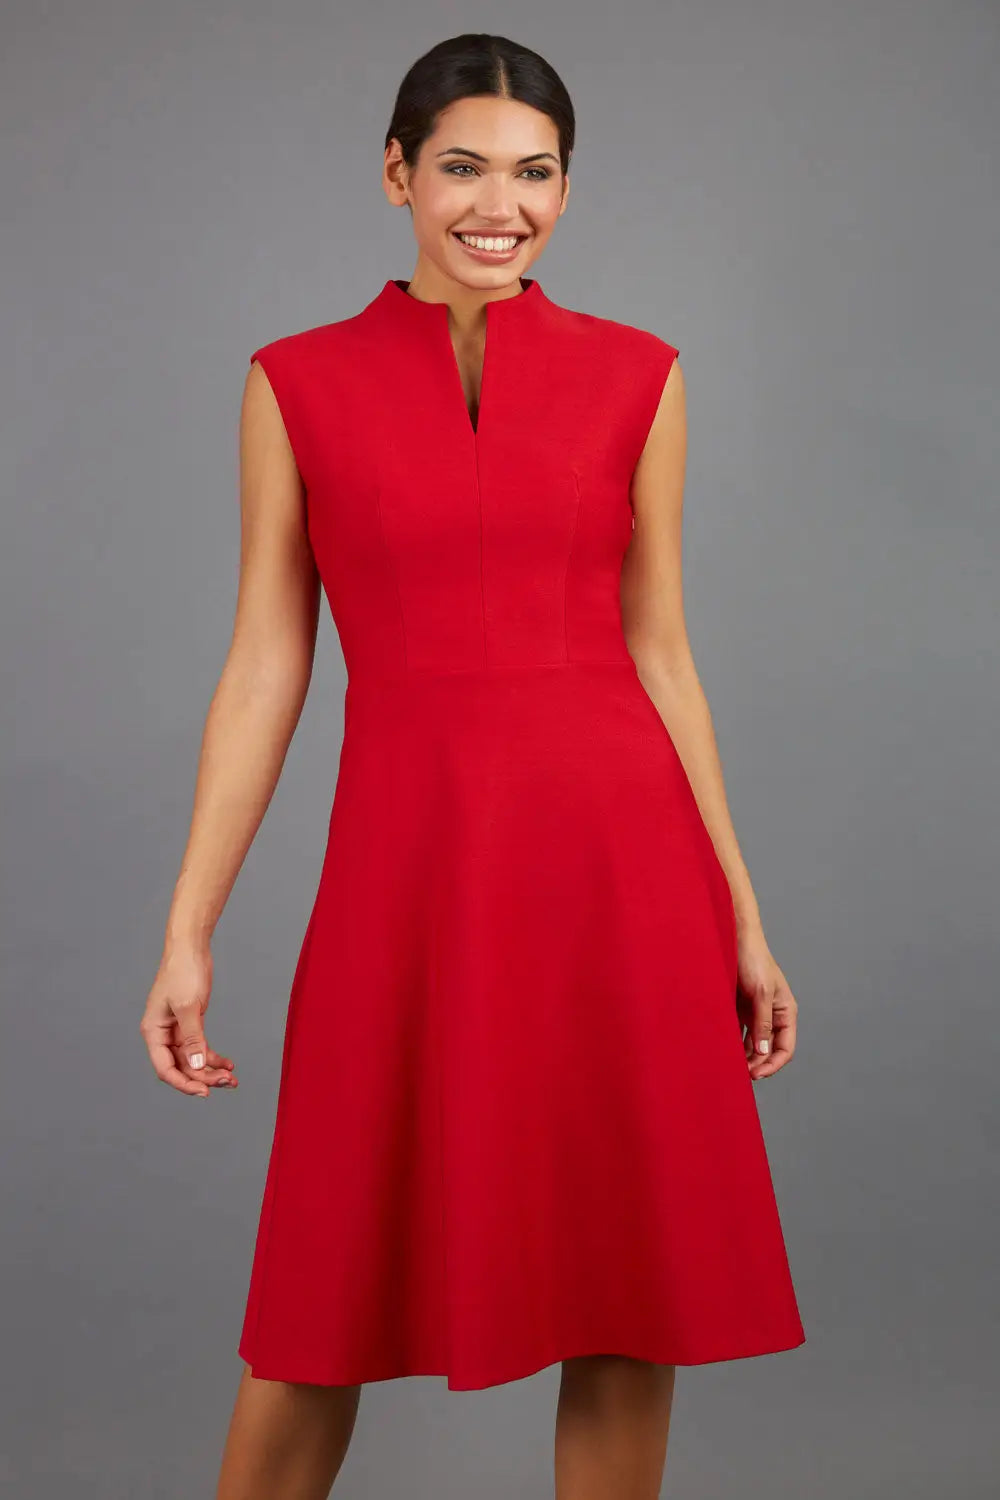 Women' Business Rio Dress - Cardinal Red NORA GARDNER | OFFICIAL STORE for work and office